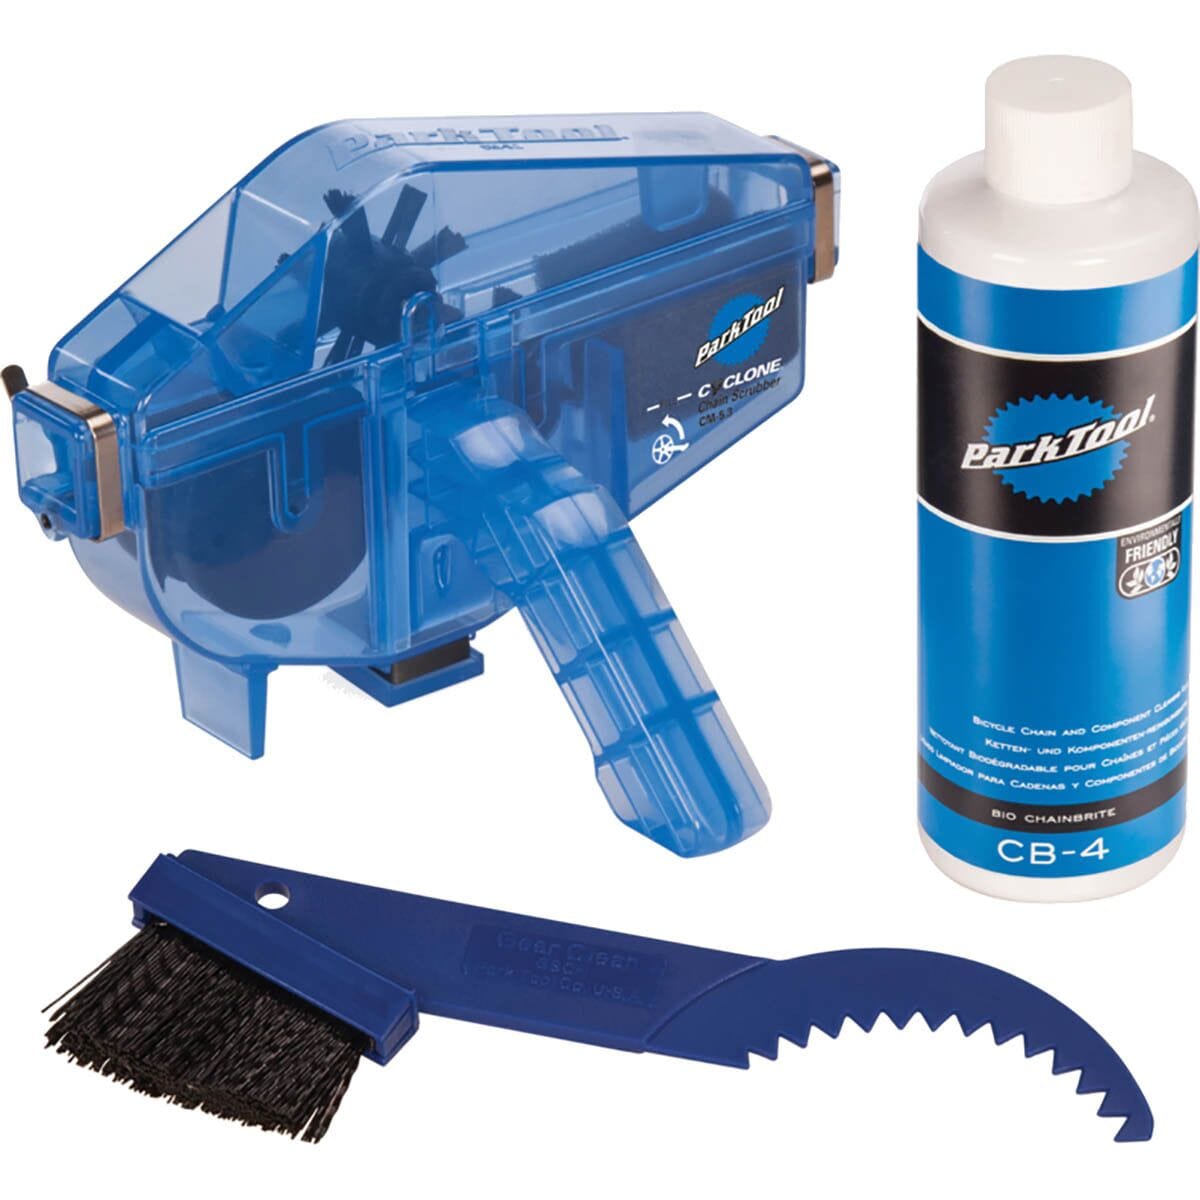 Park Tool Chain Gang Chain Cleaning System - CG-2.4 One Color, One Size